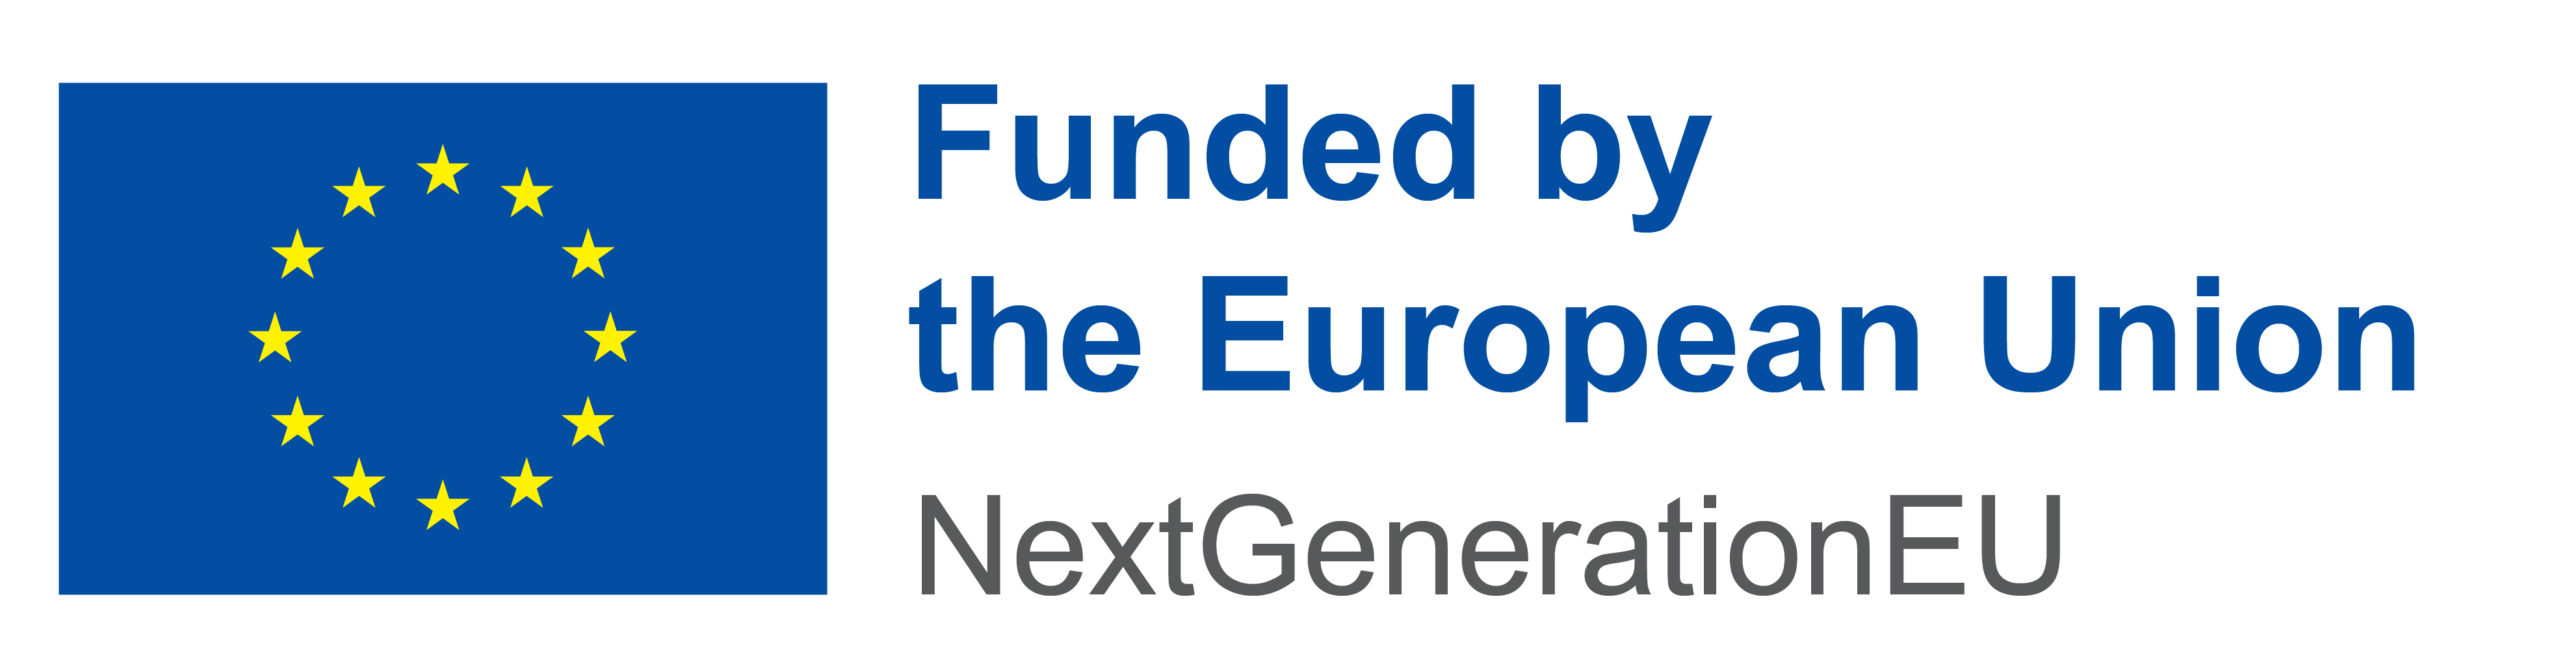 en-funded-by-the-european-union_pos